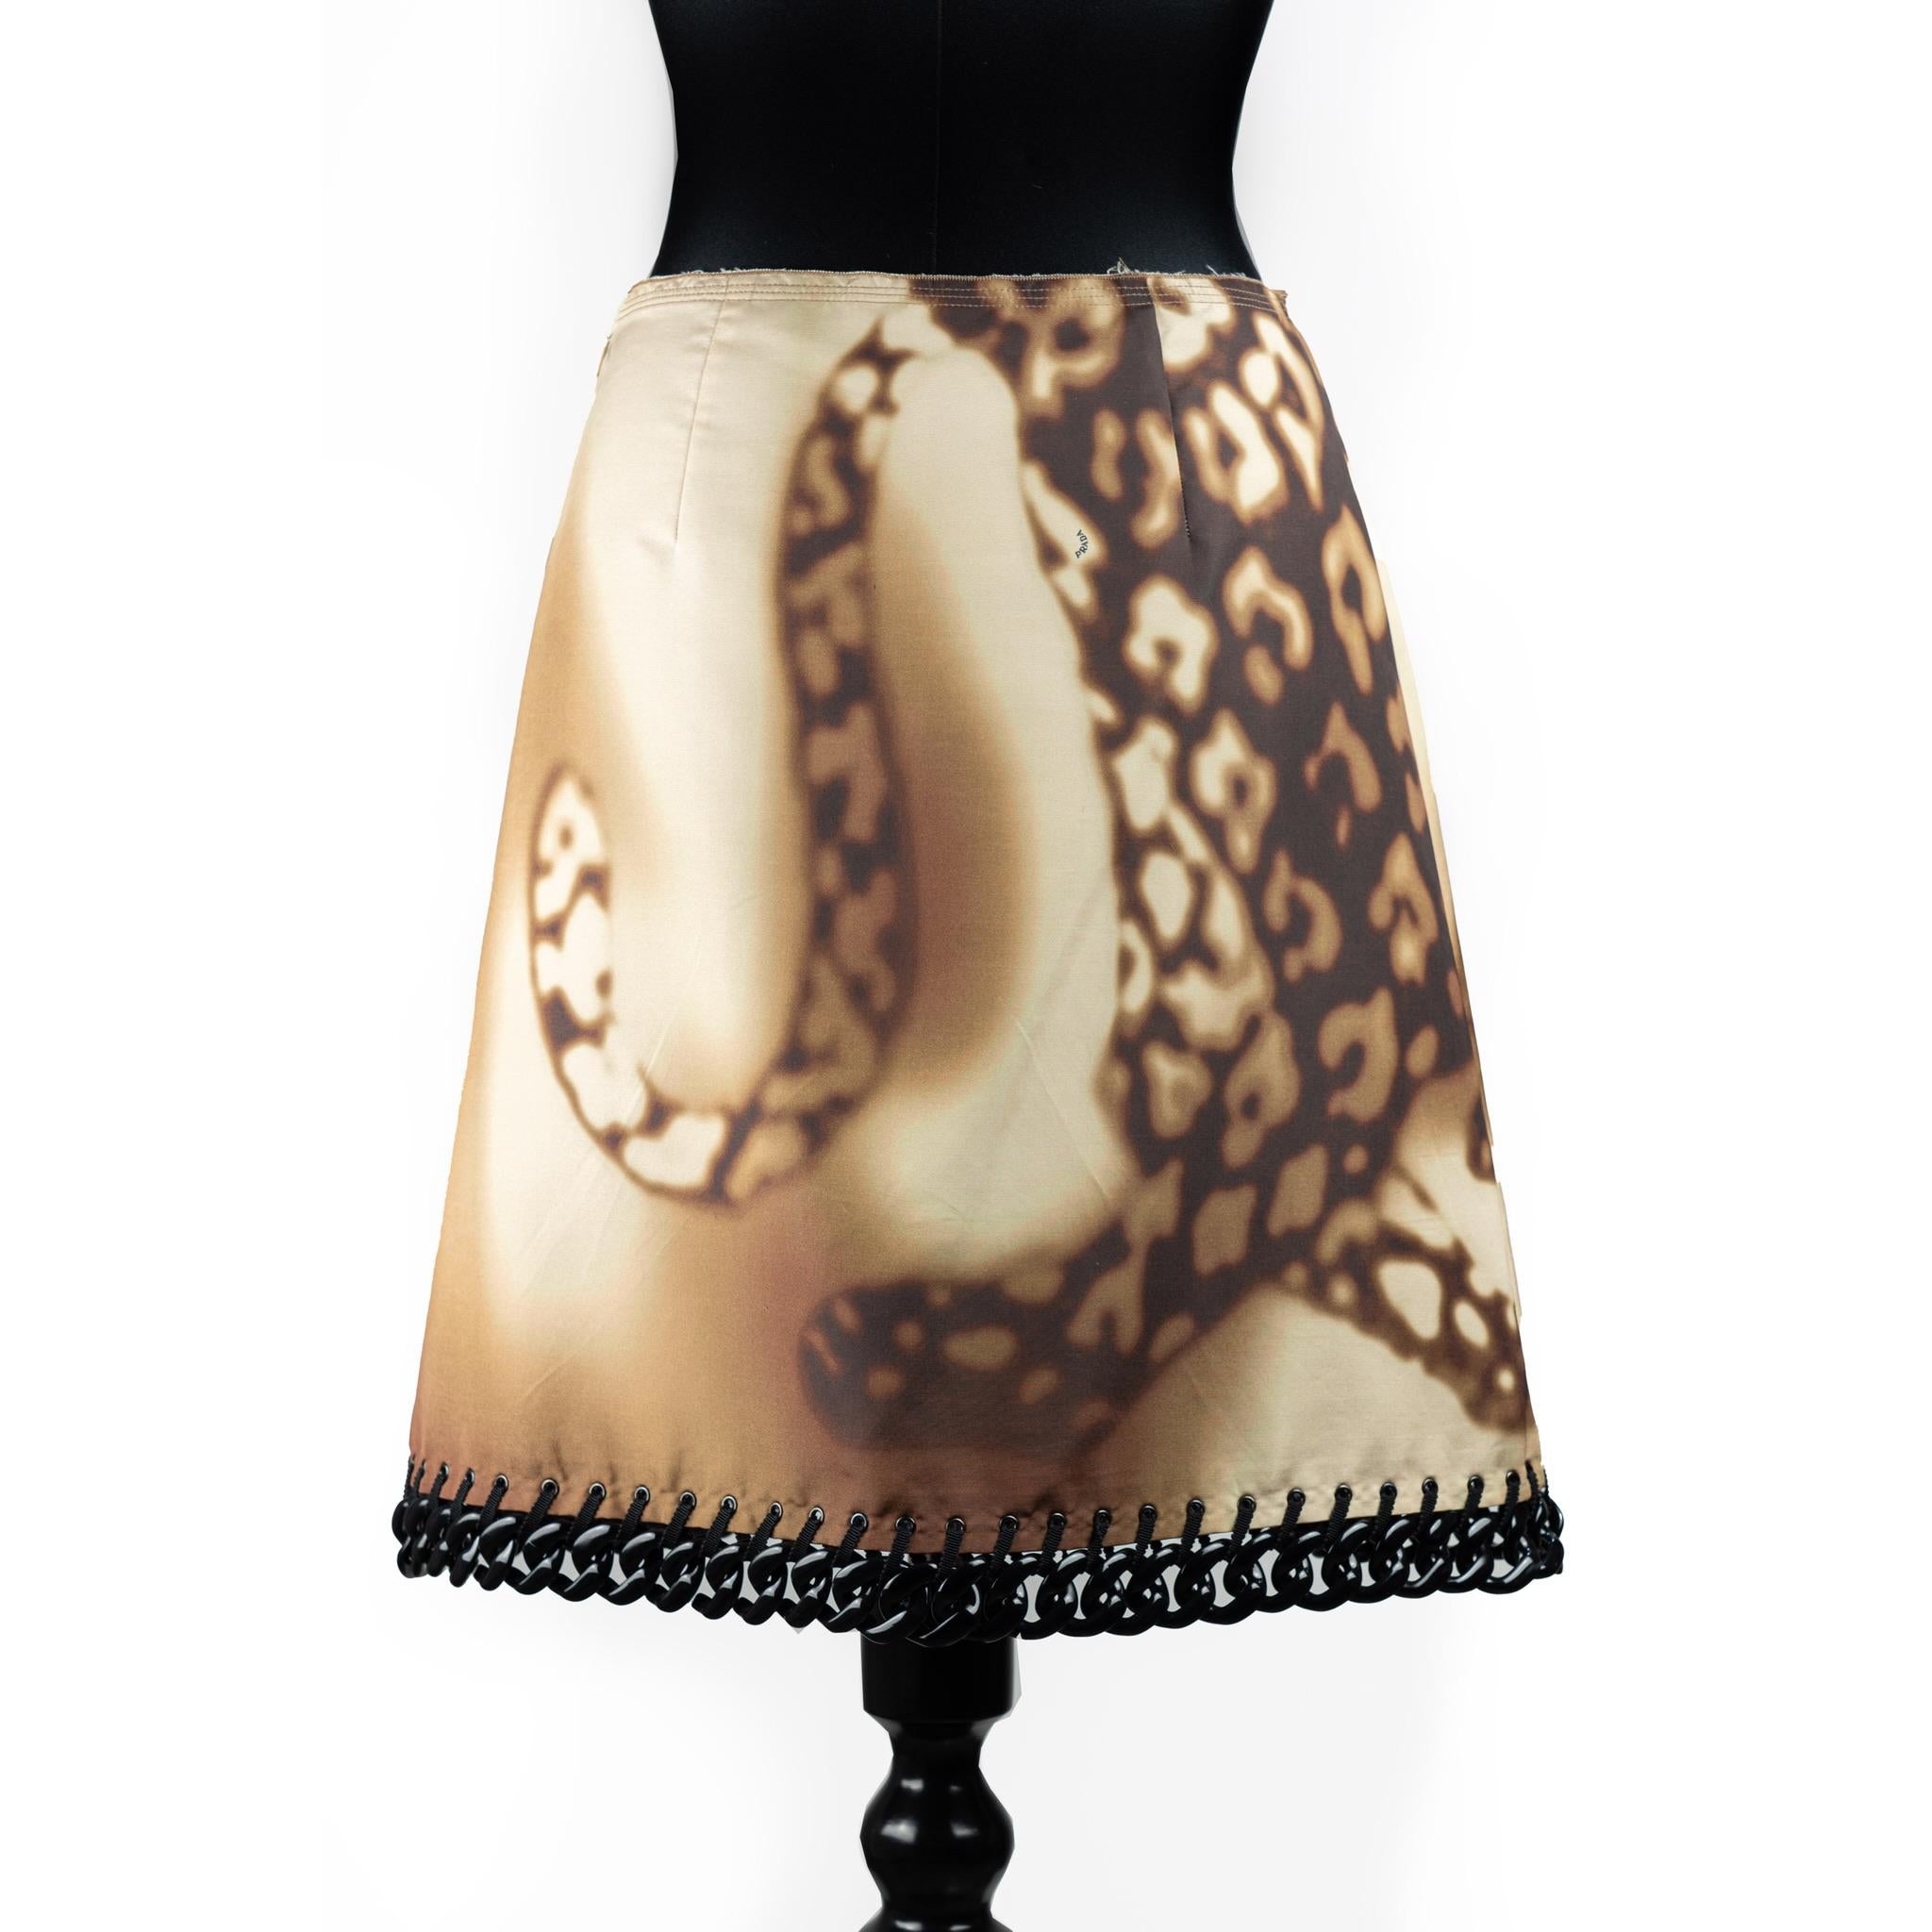 Prada midi skirt.
From 2009 Resort collection. Look 23.
Featuring a leopard print’s roar (the snout on the front and the tail on the back),
a plastic black chain as detail-jewel and a side closure zip.
Size 38 IT.
Measurements:
Waist: 37 cm
Length: